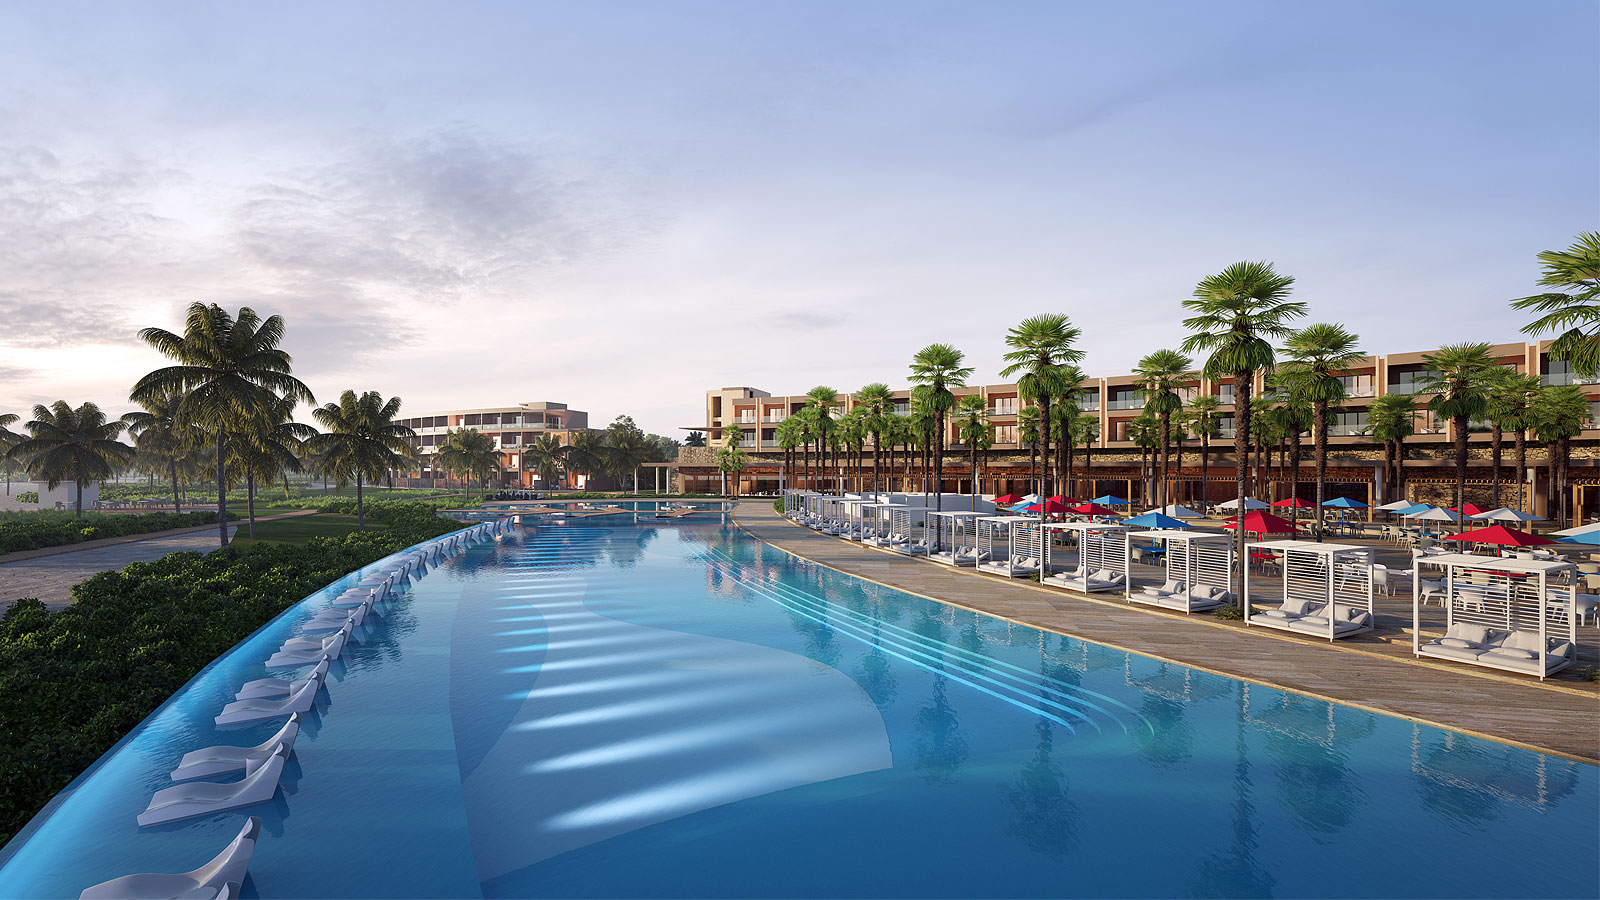 Zemi-Miches-All-Inclusive-Resort-Curio-Collection-by-Hilton-Pool-and-Exterior-Rendering_Credit-Hilton